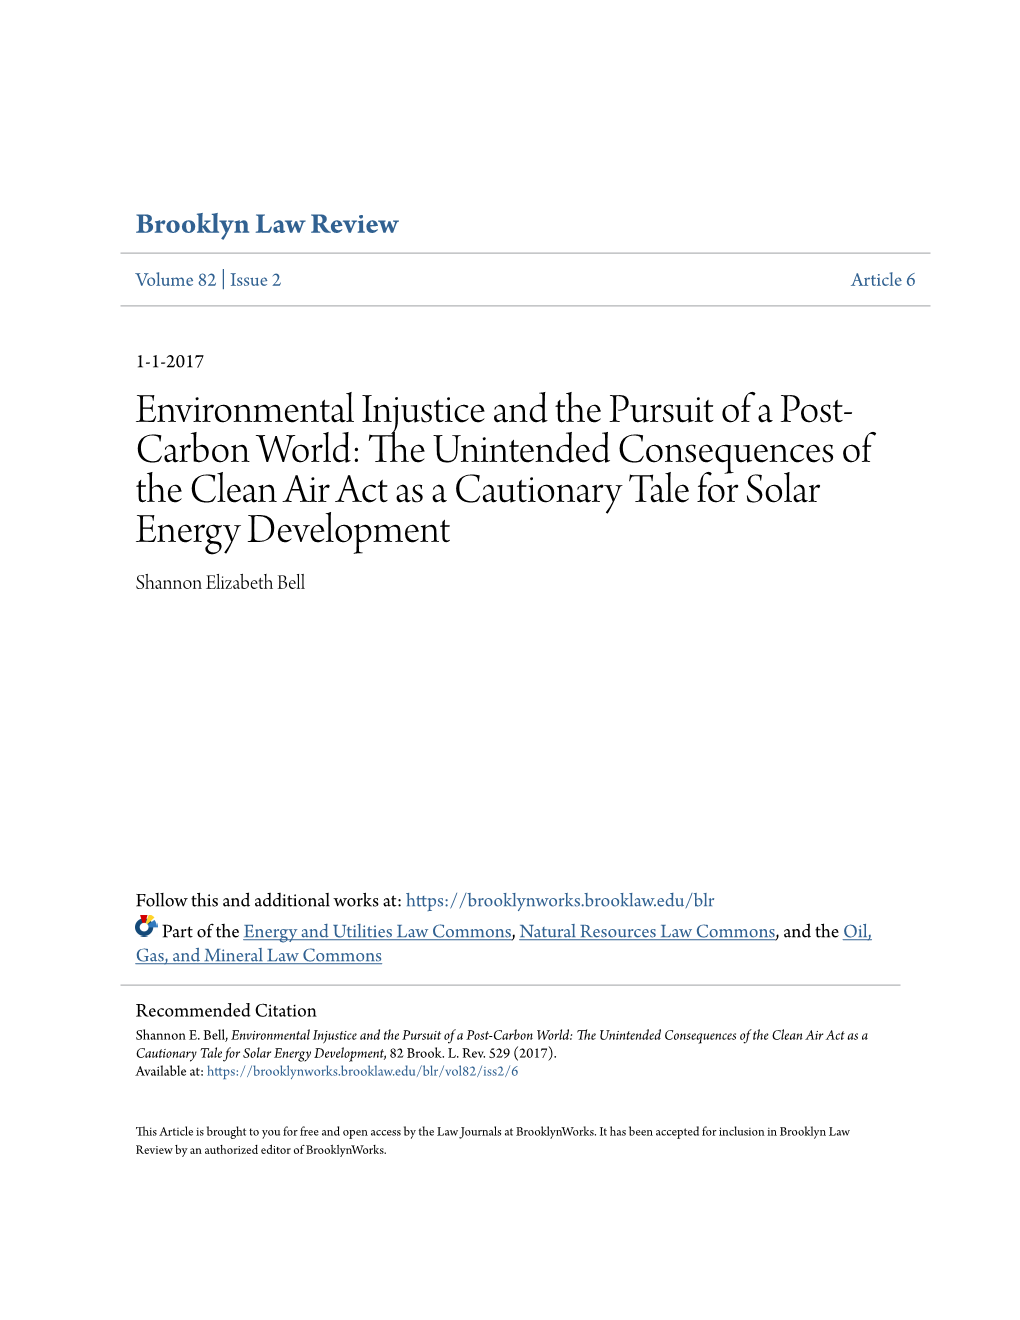 Environmental Injustice and the Pursuit of a Post-Carbon World